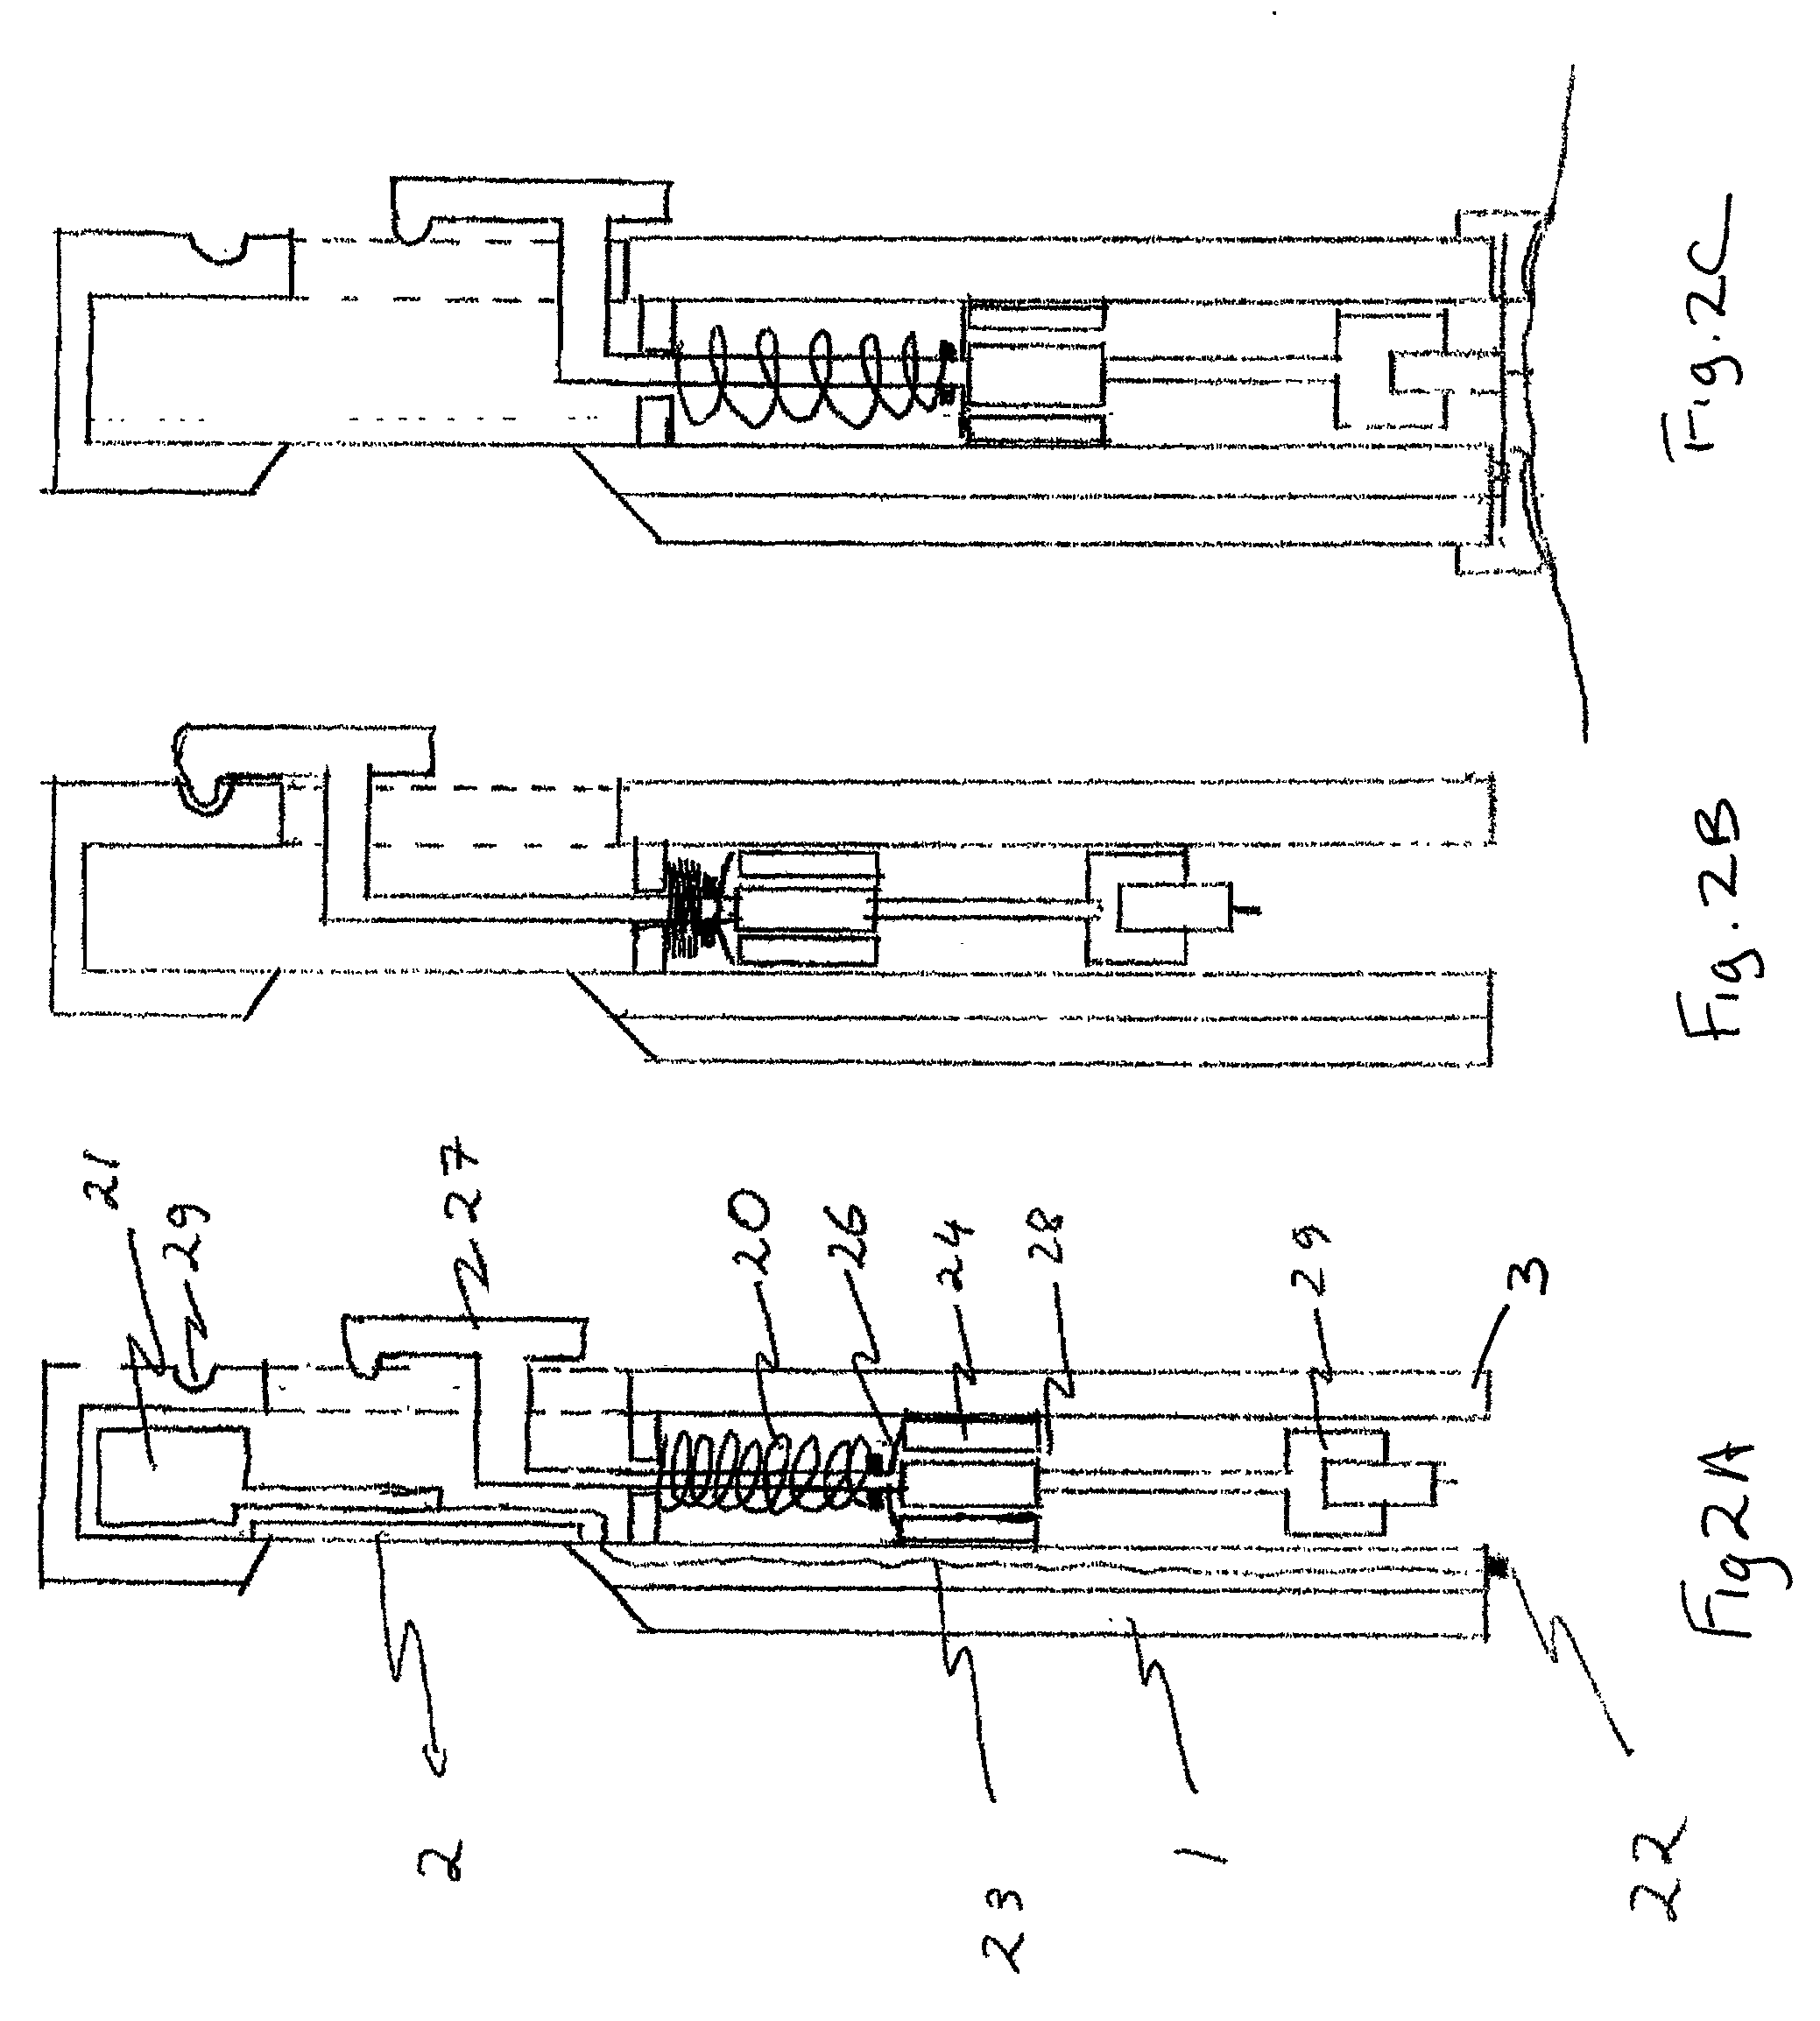 Combined lancet and electrochemical analyte-testing apparatus